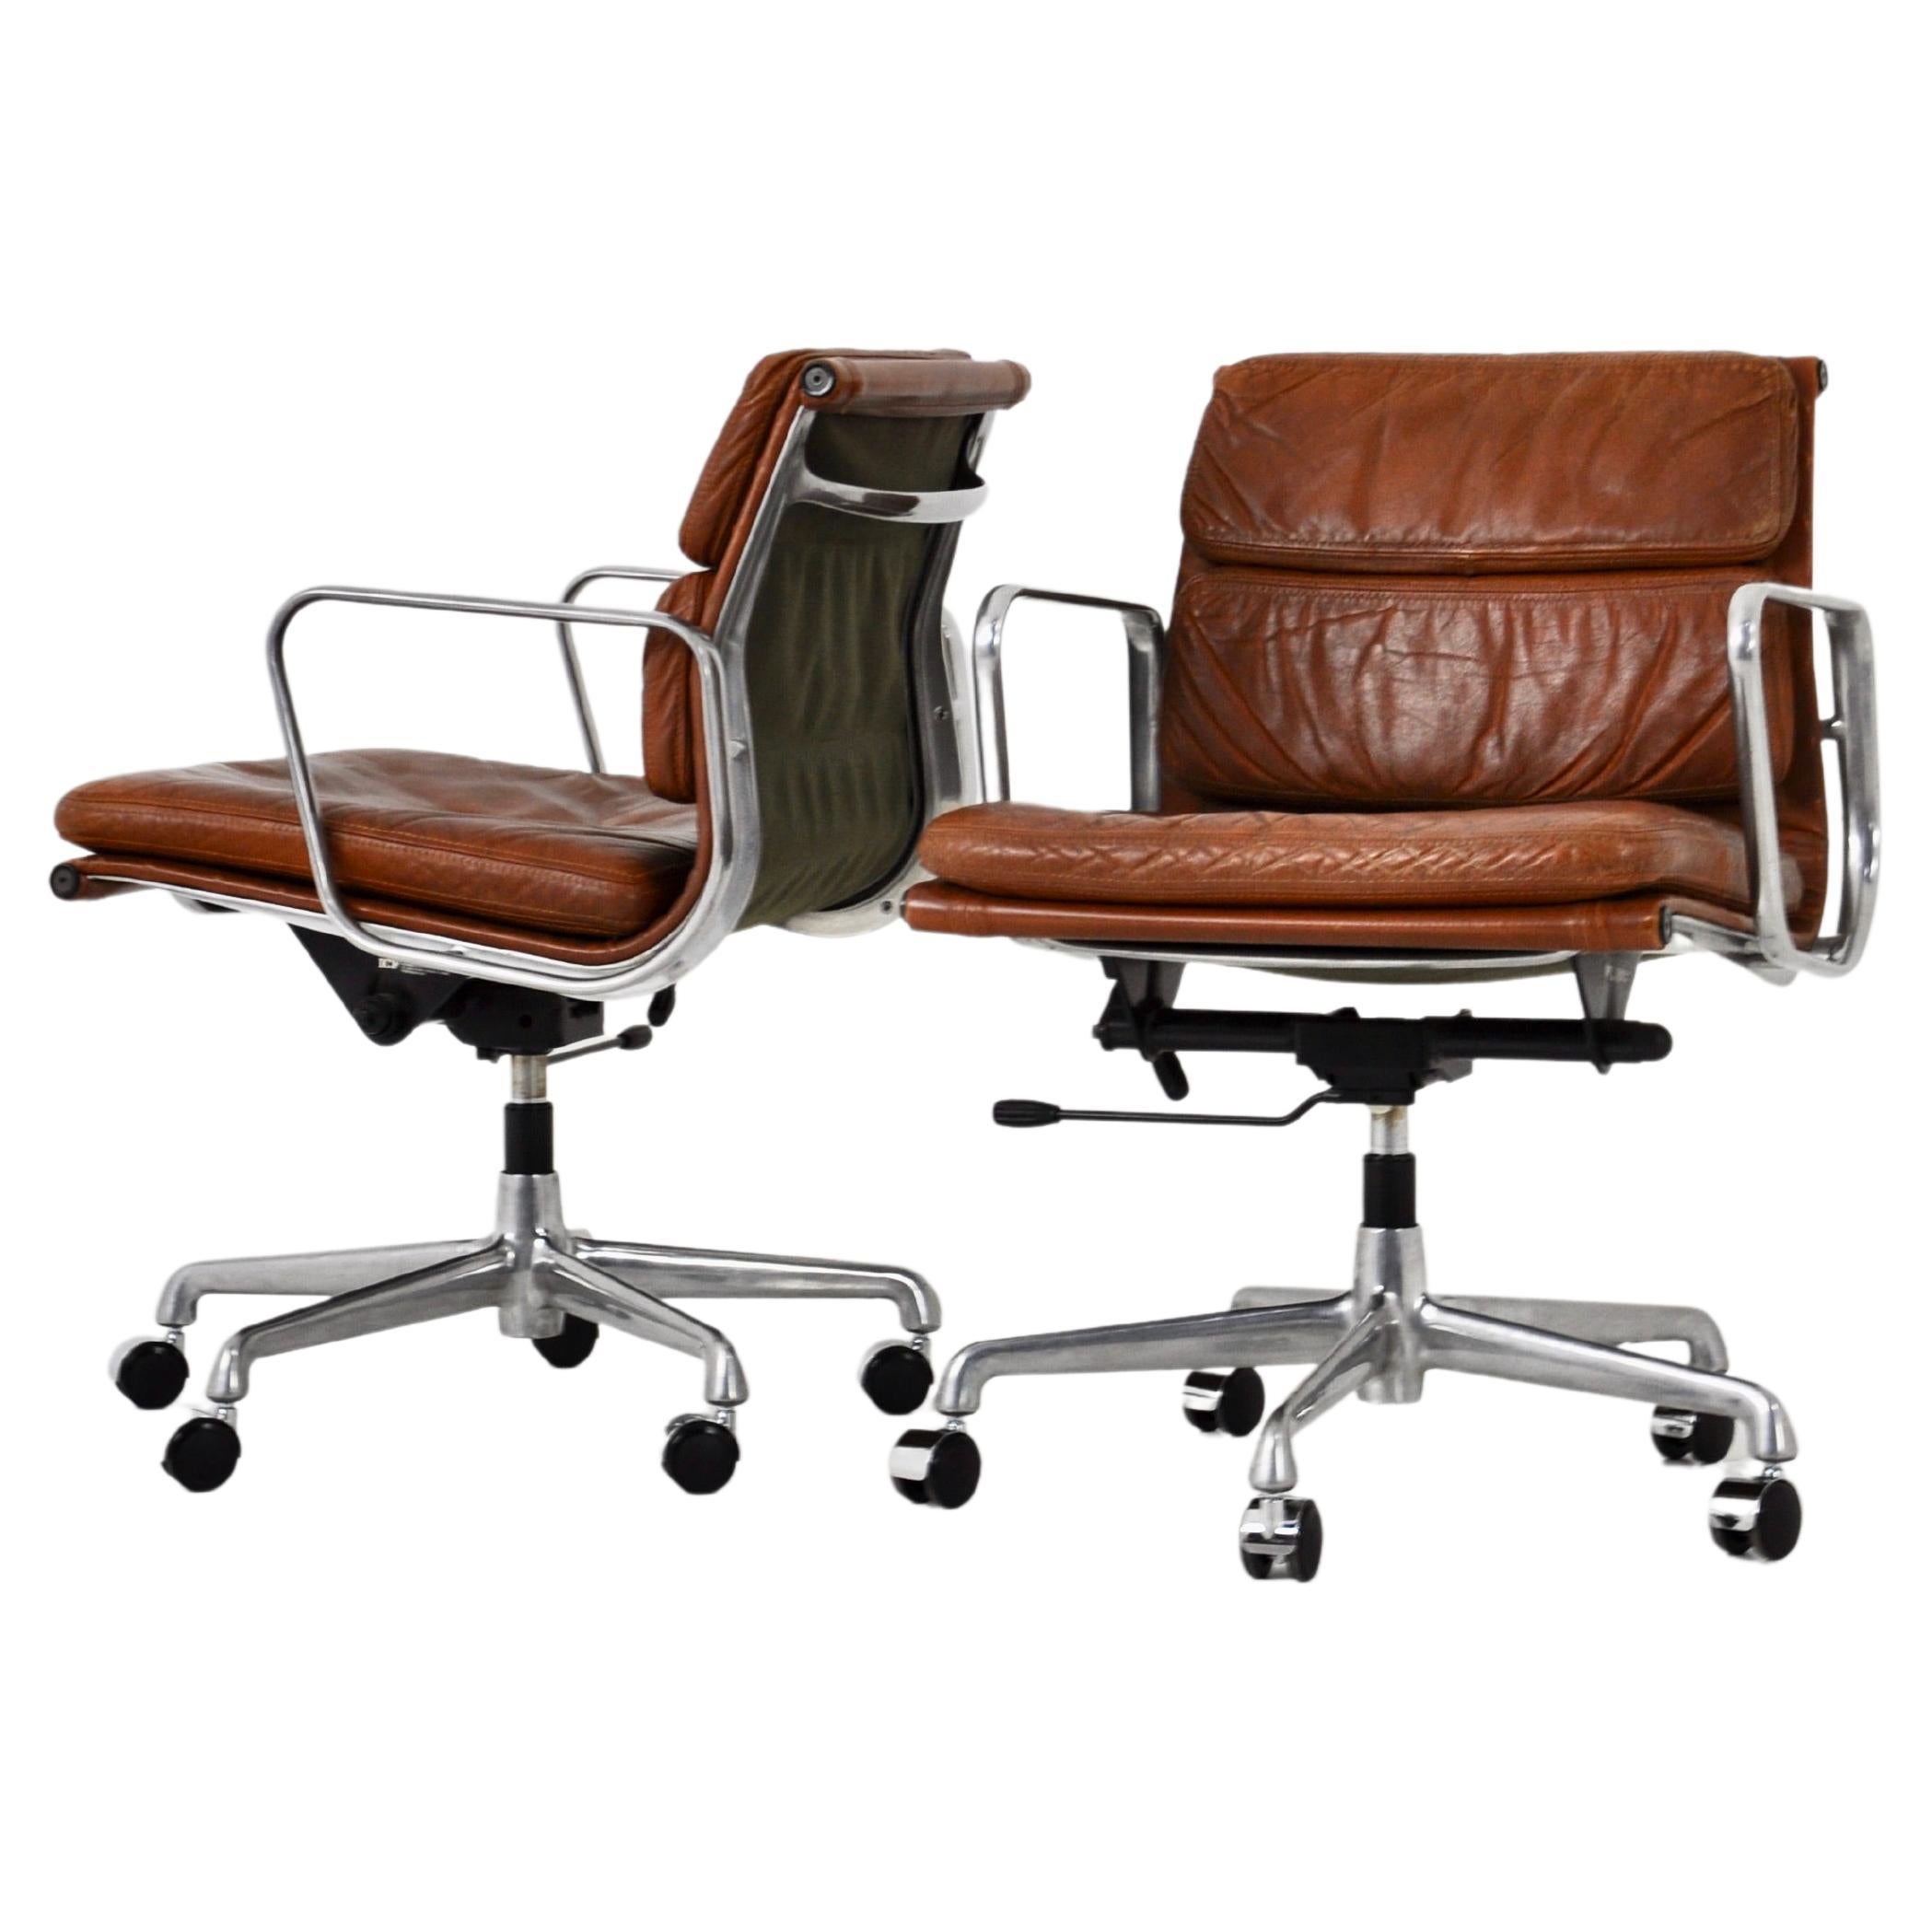 Inspiration Soft Pad EA219 - Leather Office Chair - Mueble Design